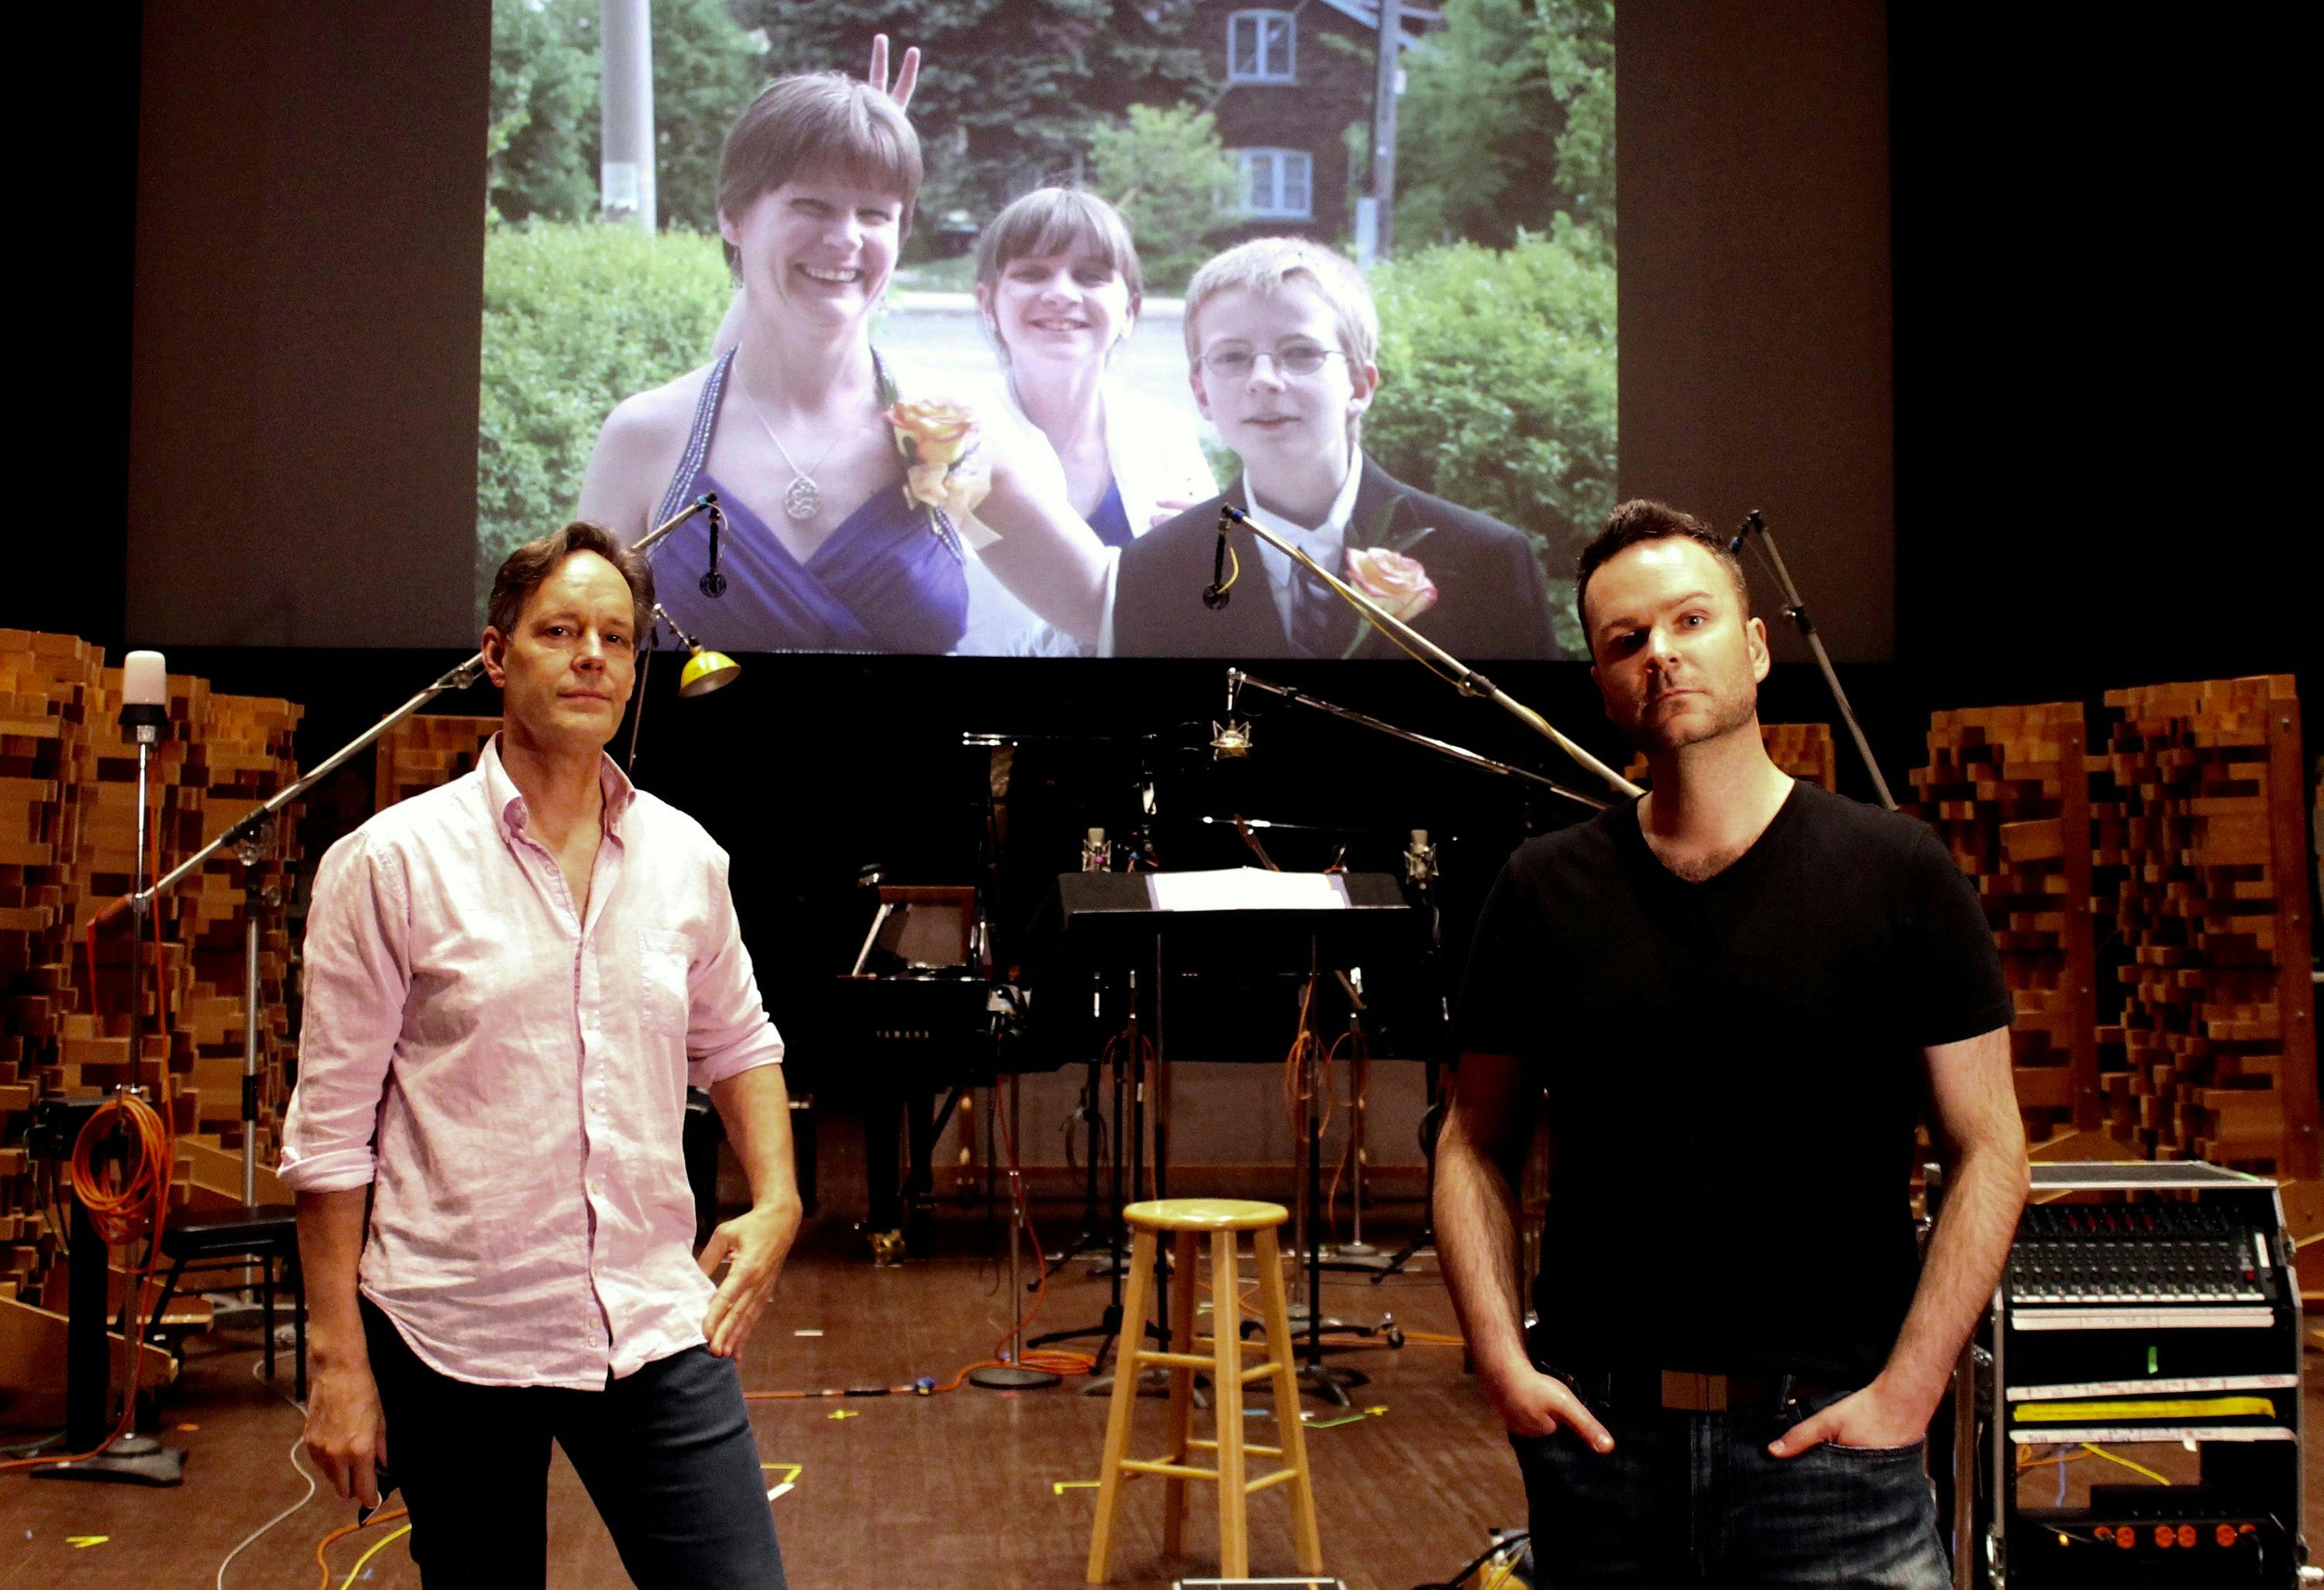 Composer Jake Heggie and Joshua (foreground) on scoring stage of Skywalker Sound with an image of Joshua's sister Nathalie and her two children (background). PHOTO BY ZOE TARSHIS